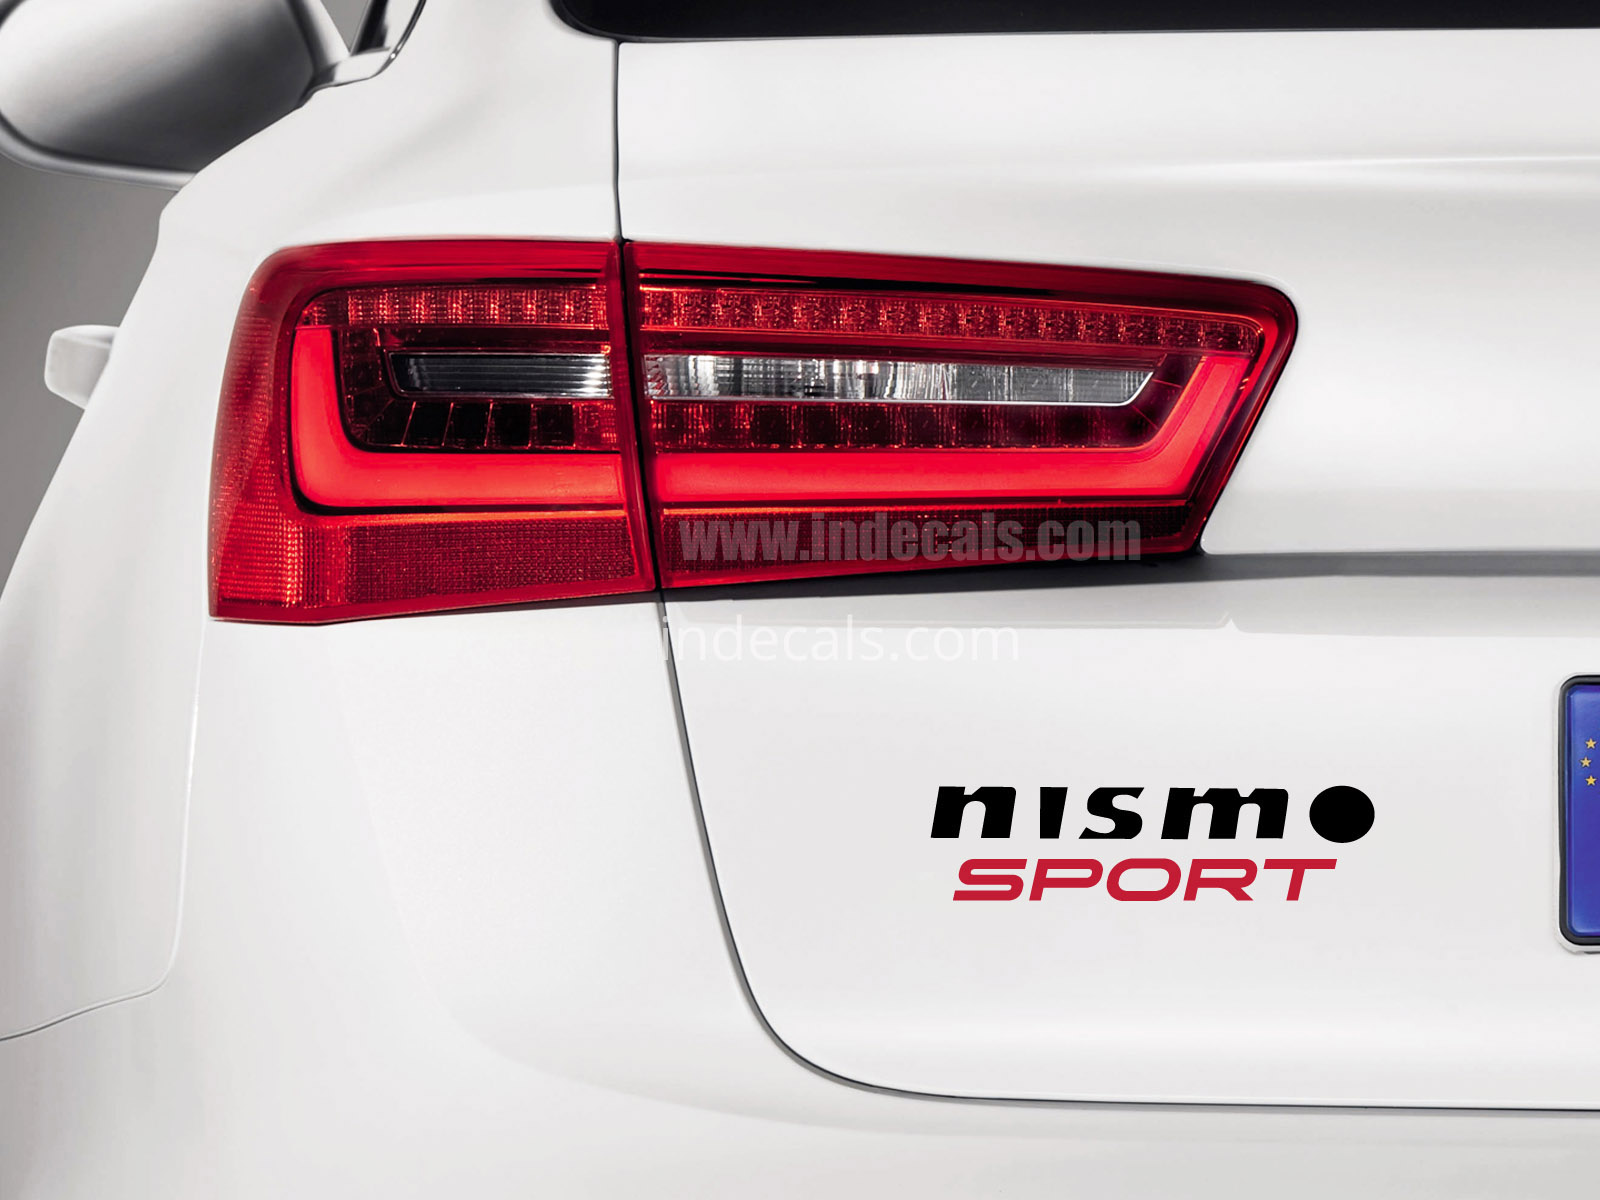 1 x Nismo Sports Sticker for Trunk - Black & Red